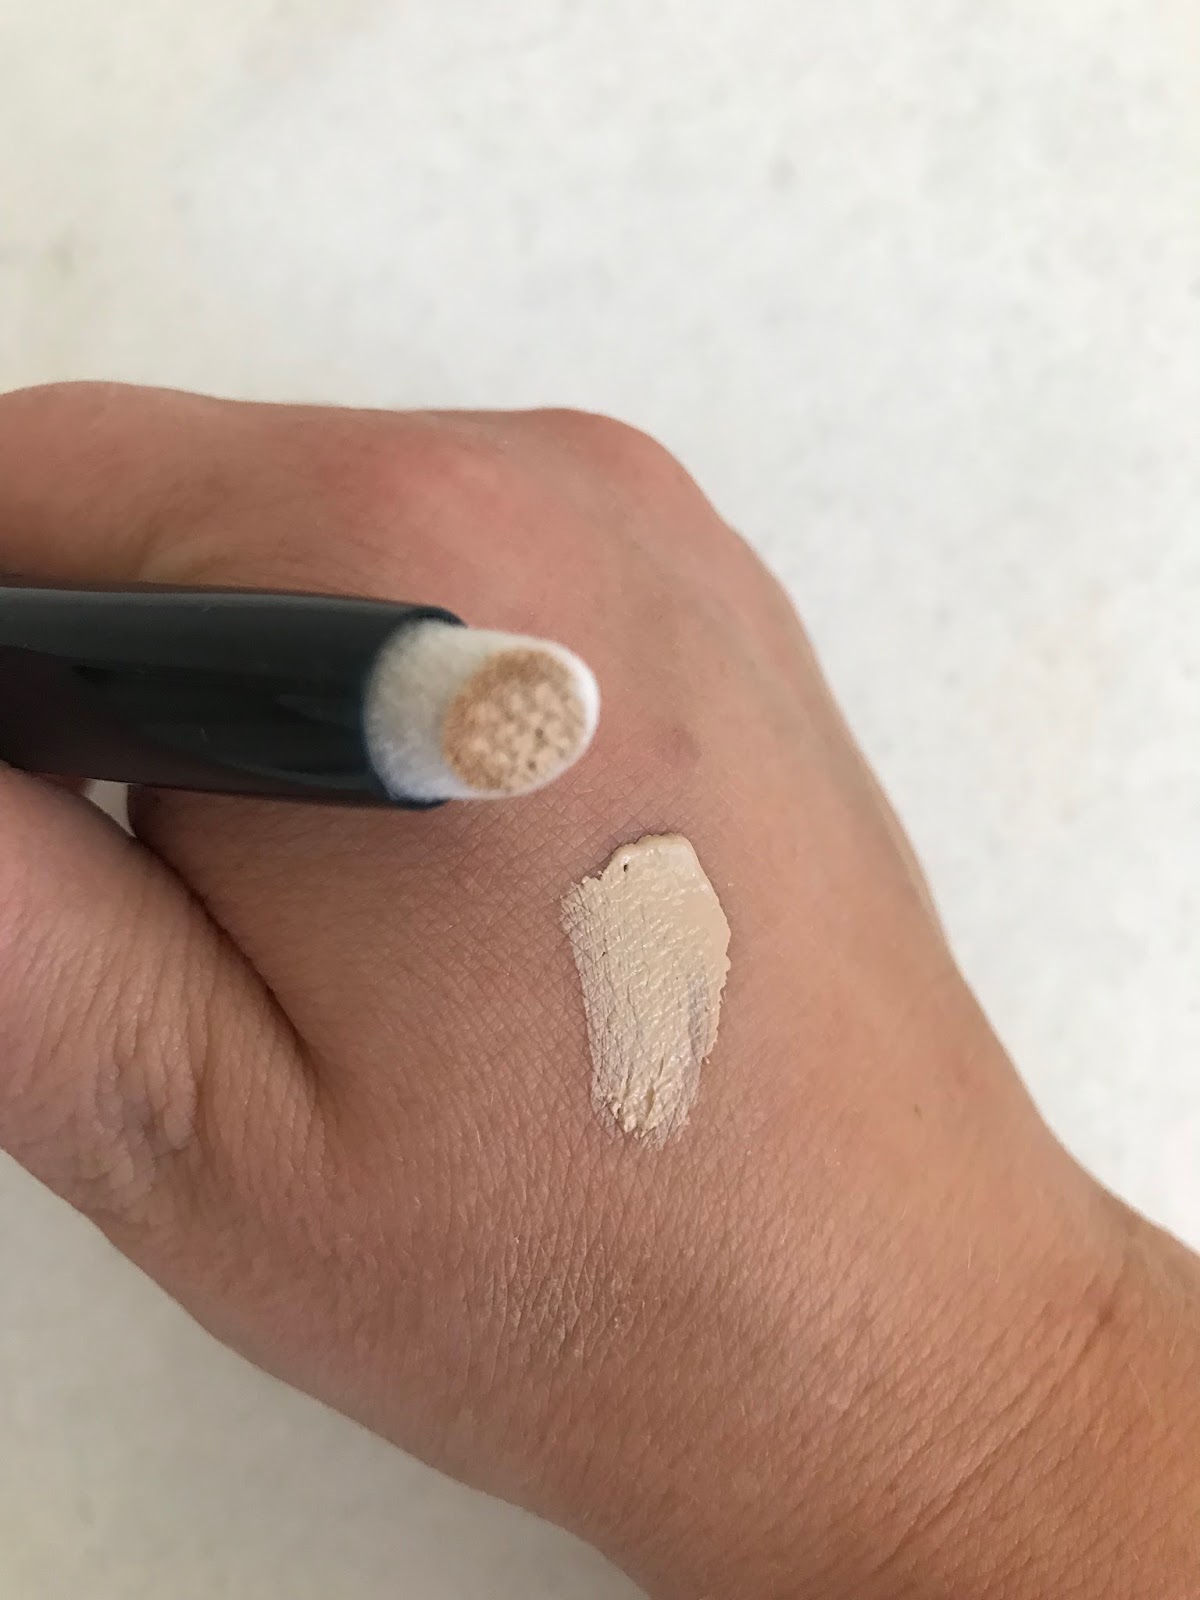 Savvy dr hauschka concealer crater Silver delay